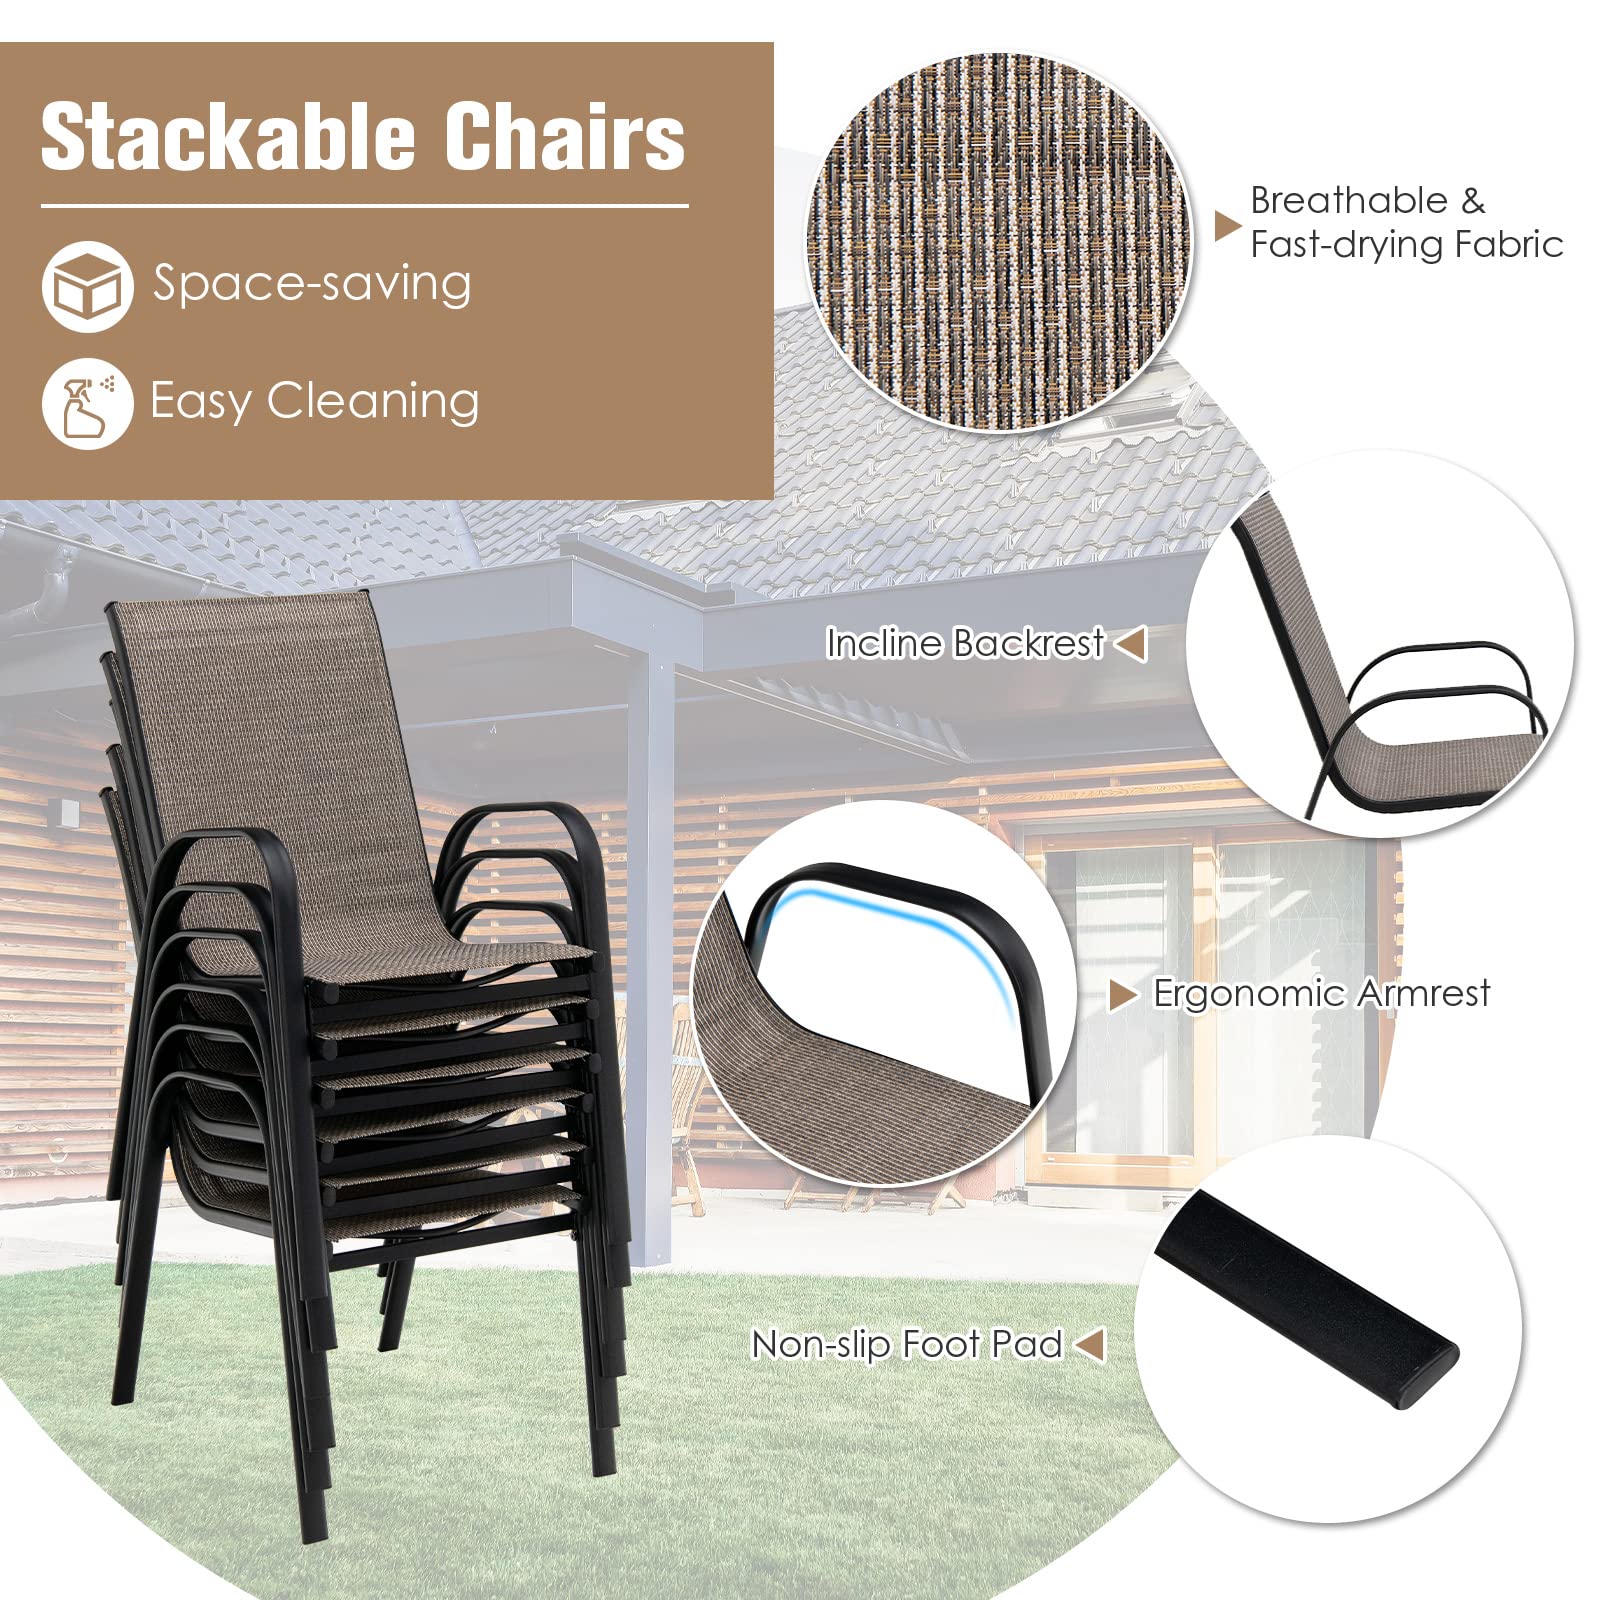 Giantex Set of 6 Patio Chairs, Stackable Outdoor Dining Chairs, with Curved Armrests and Breathable Fabric